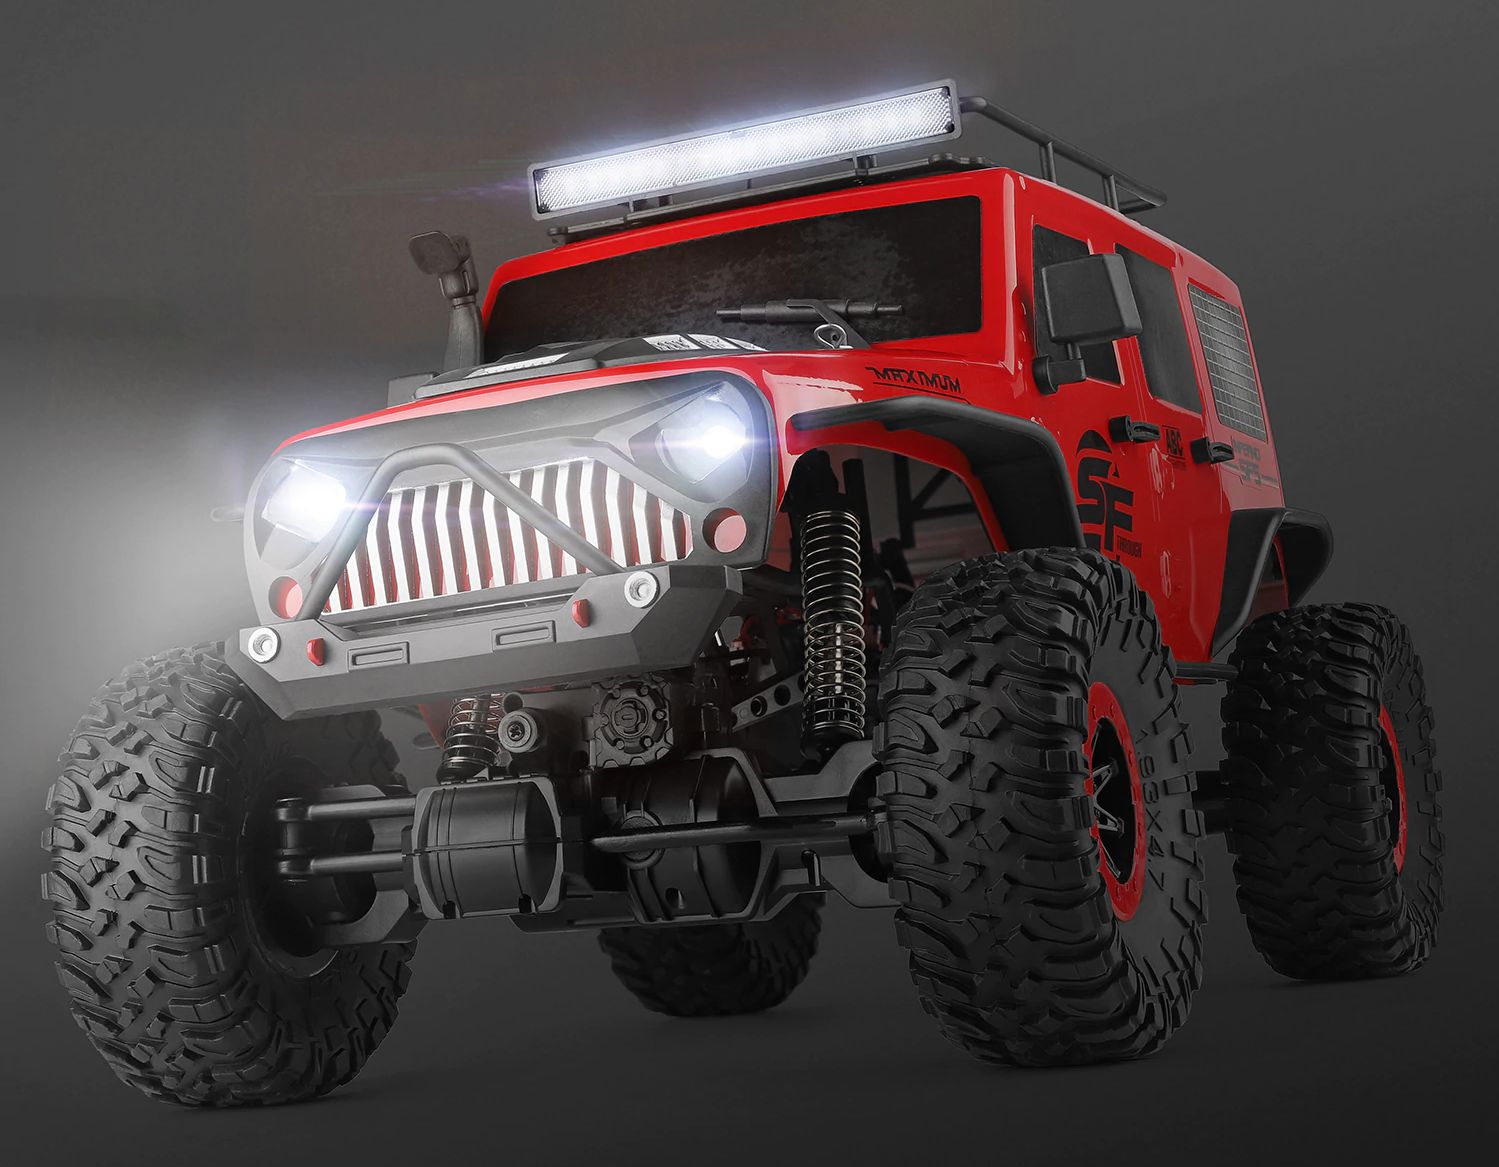  1/10 4WD  - OFF ROAD JEEP (15 /, )